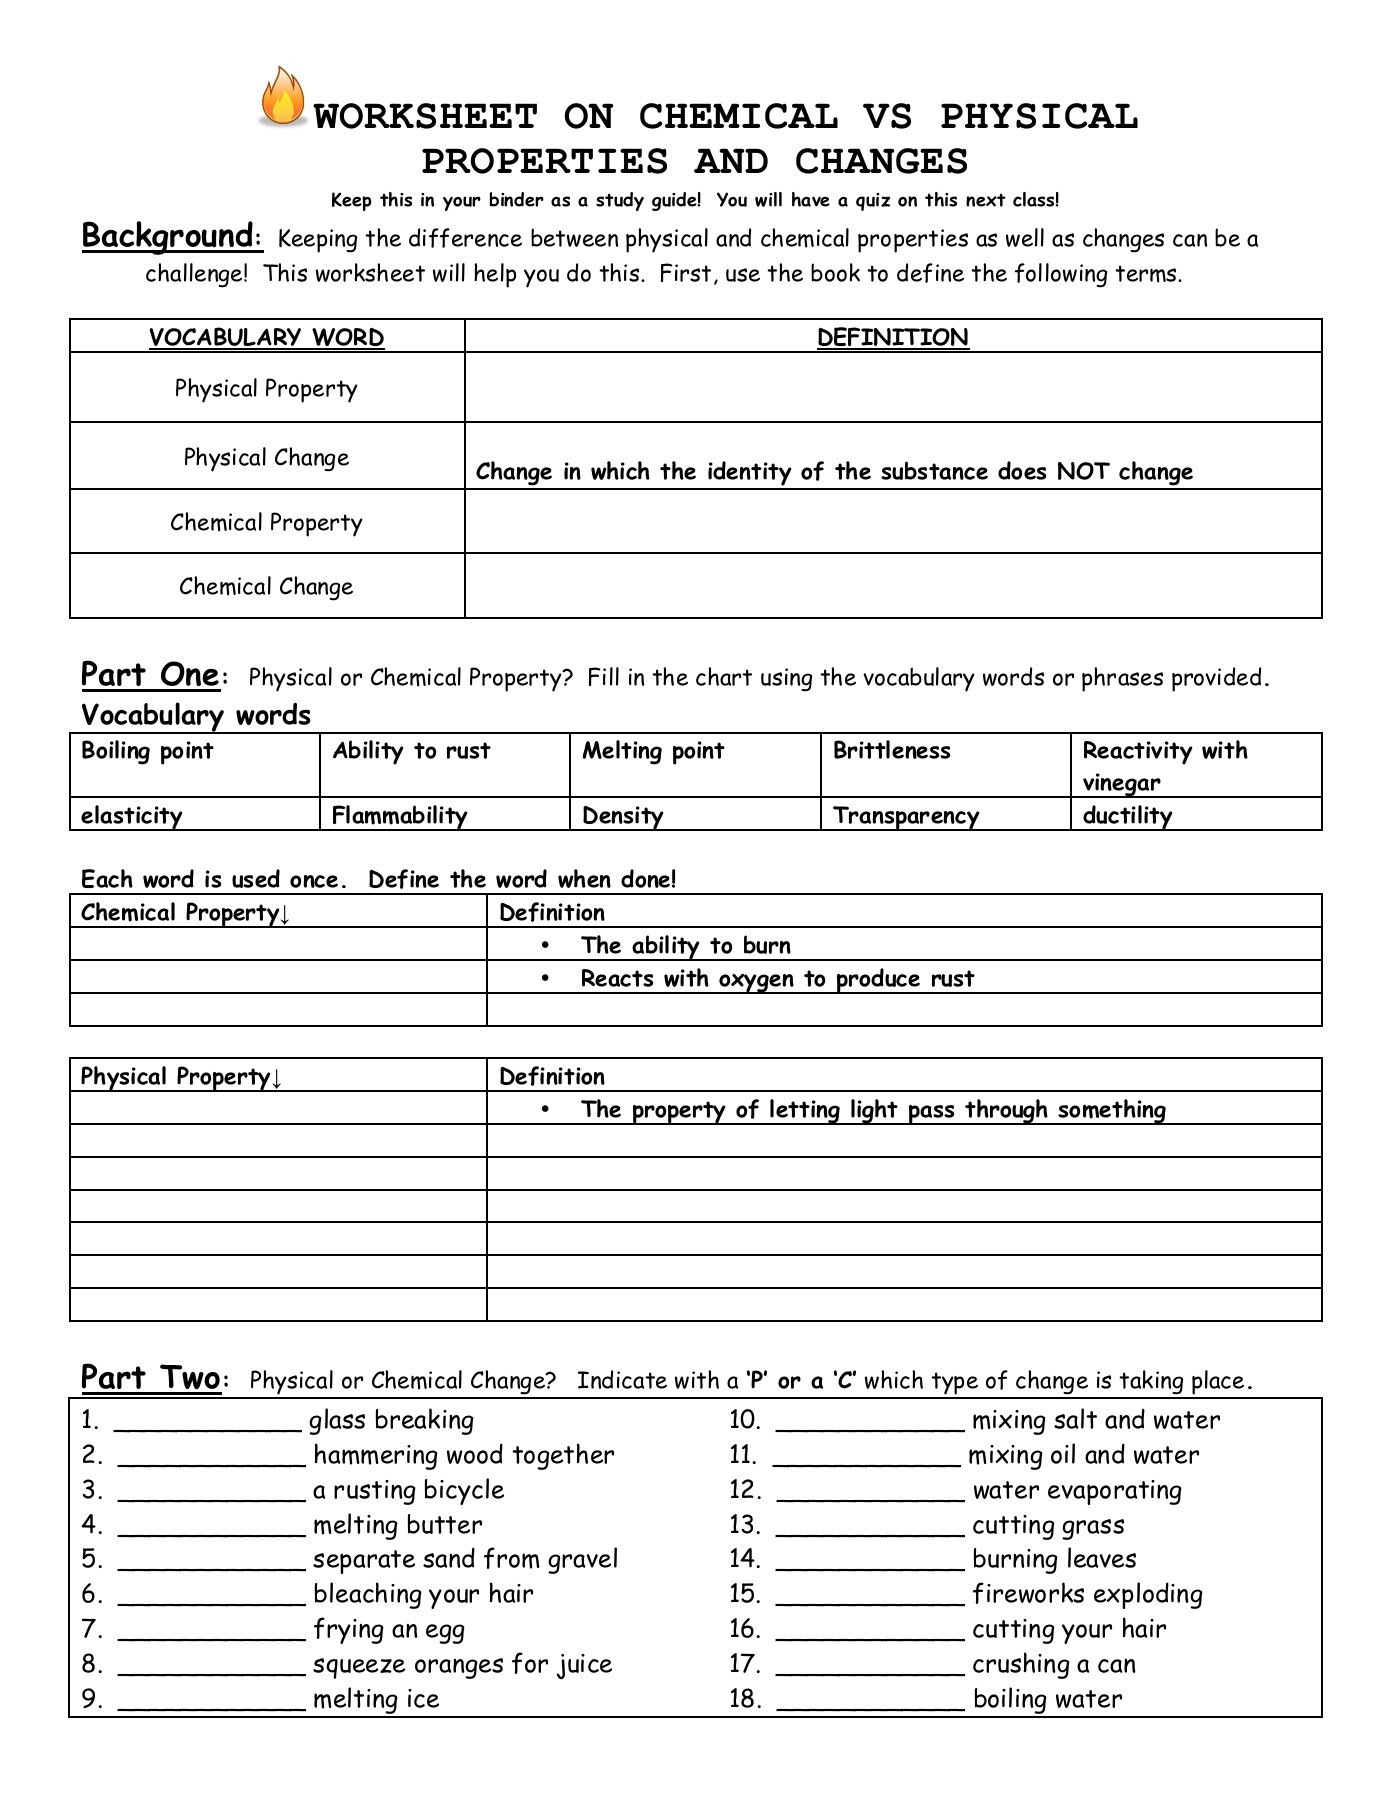 Physical Vs Chemical Changes Worksheet Worksheet On Chemical Vs Physical Properties and Changes